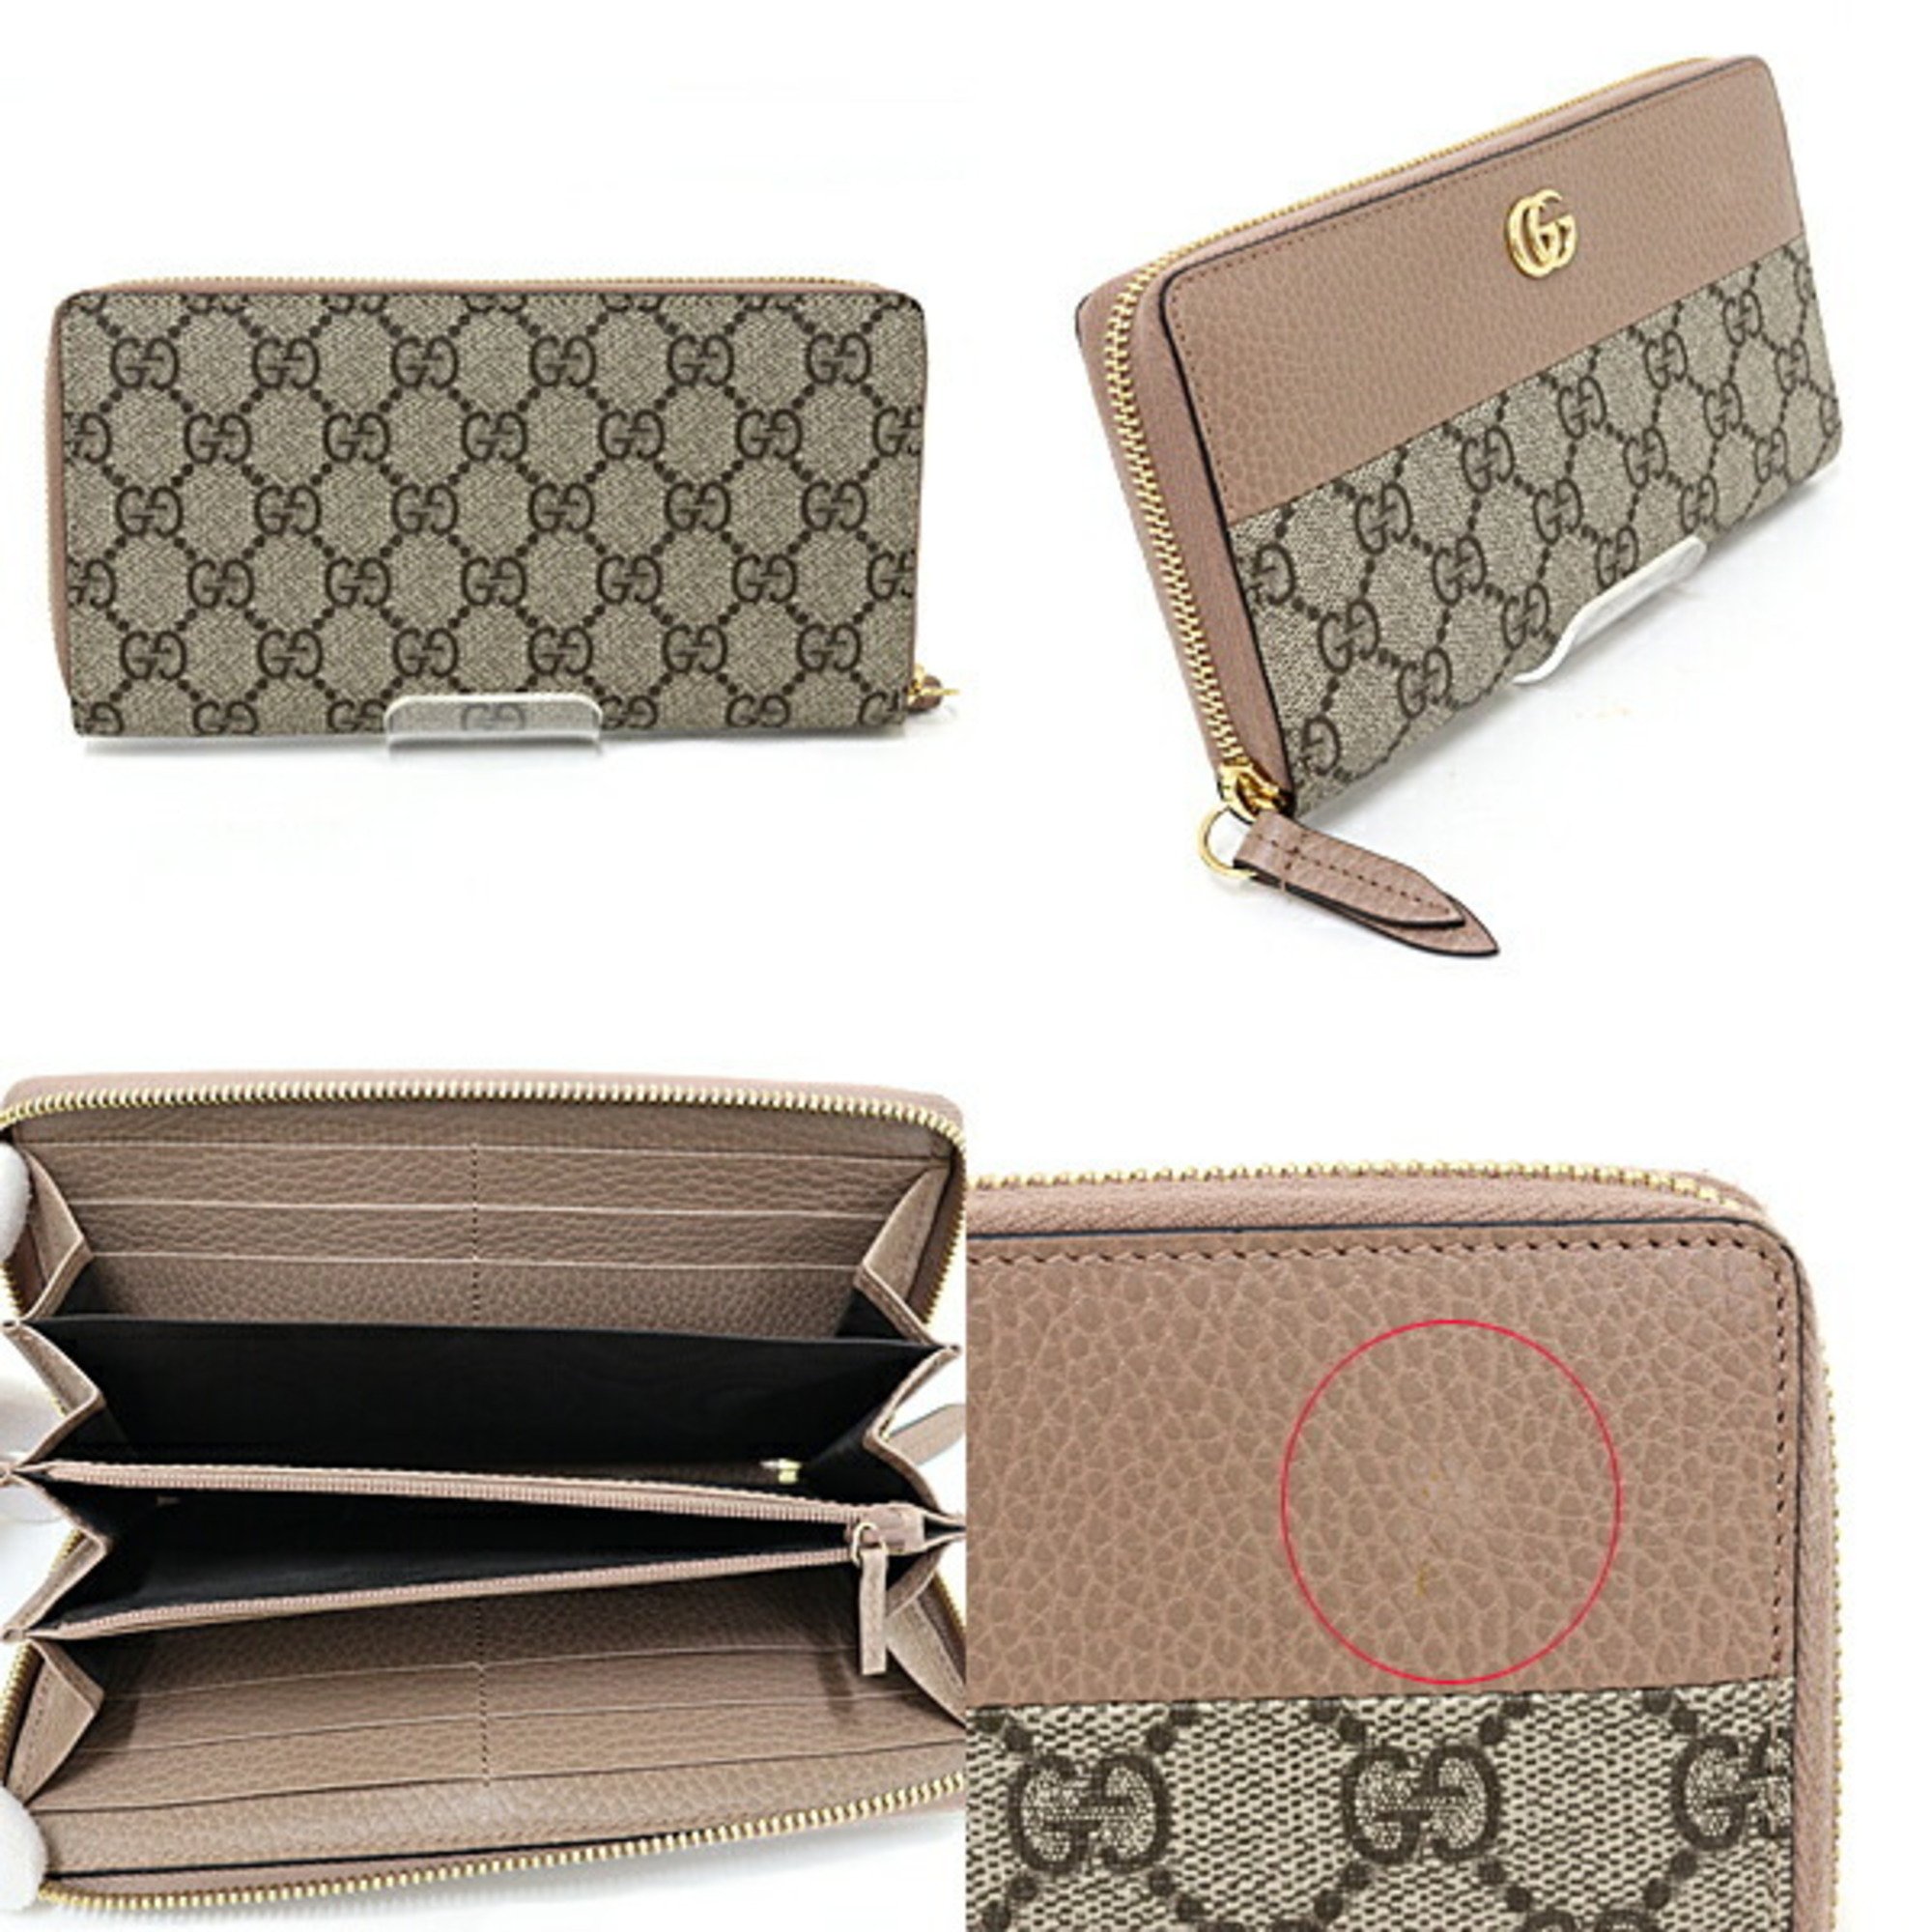 GUCCI Double G Zip Around Wallet Beige & Ebony GG Supreme Canvas Dusty Pink Leather 456117